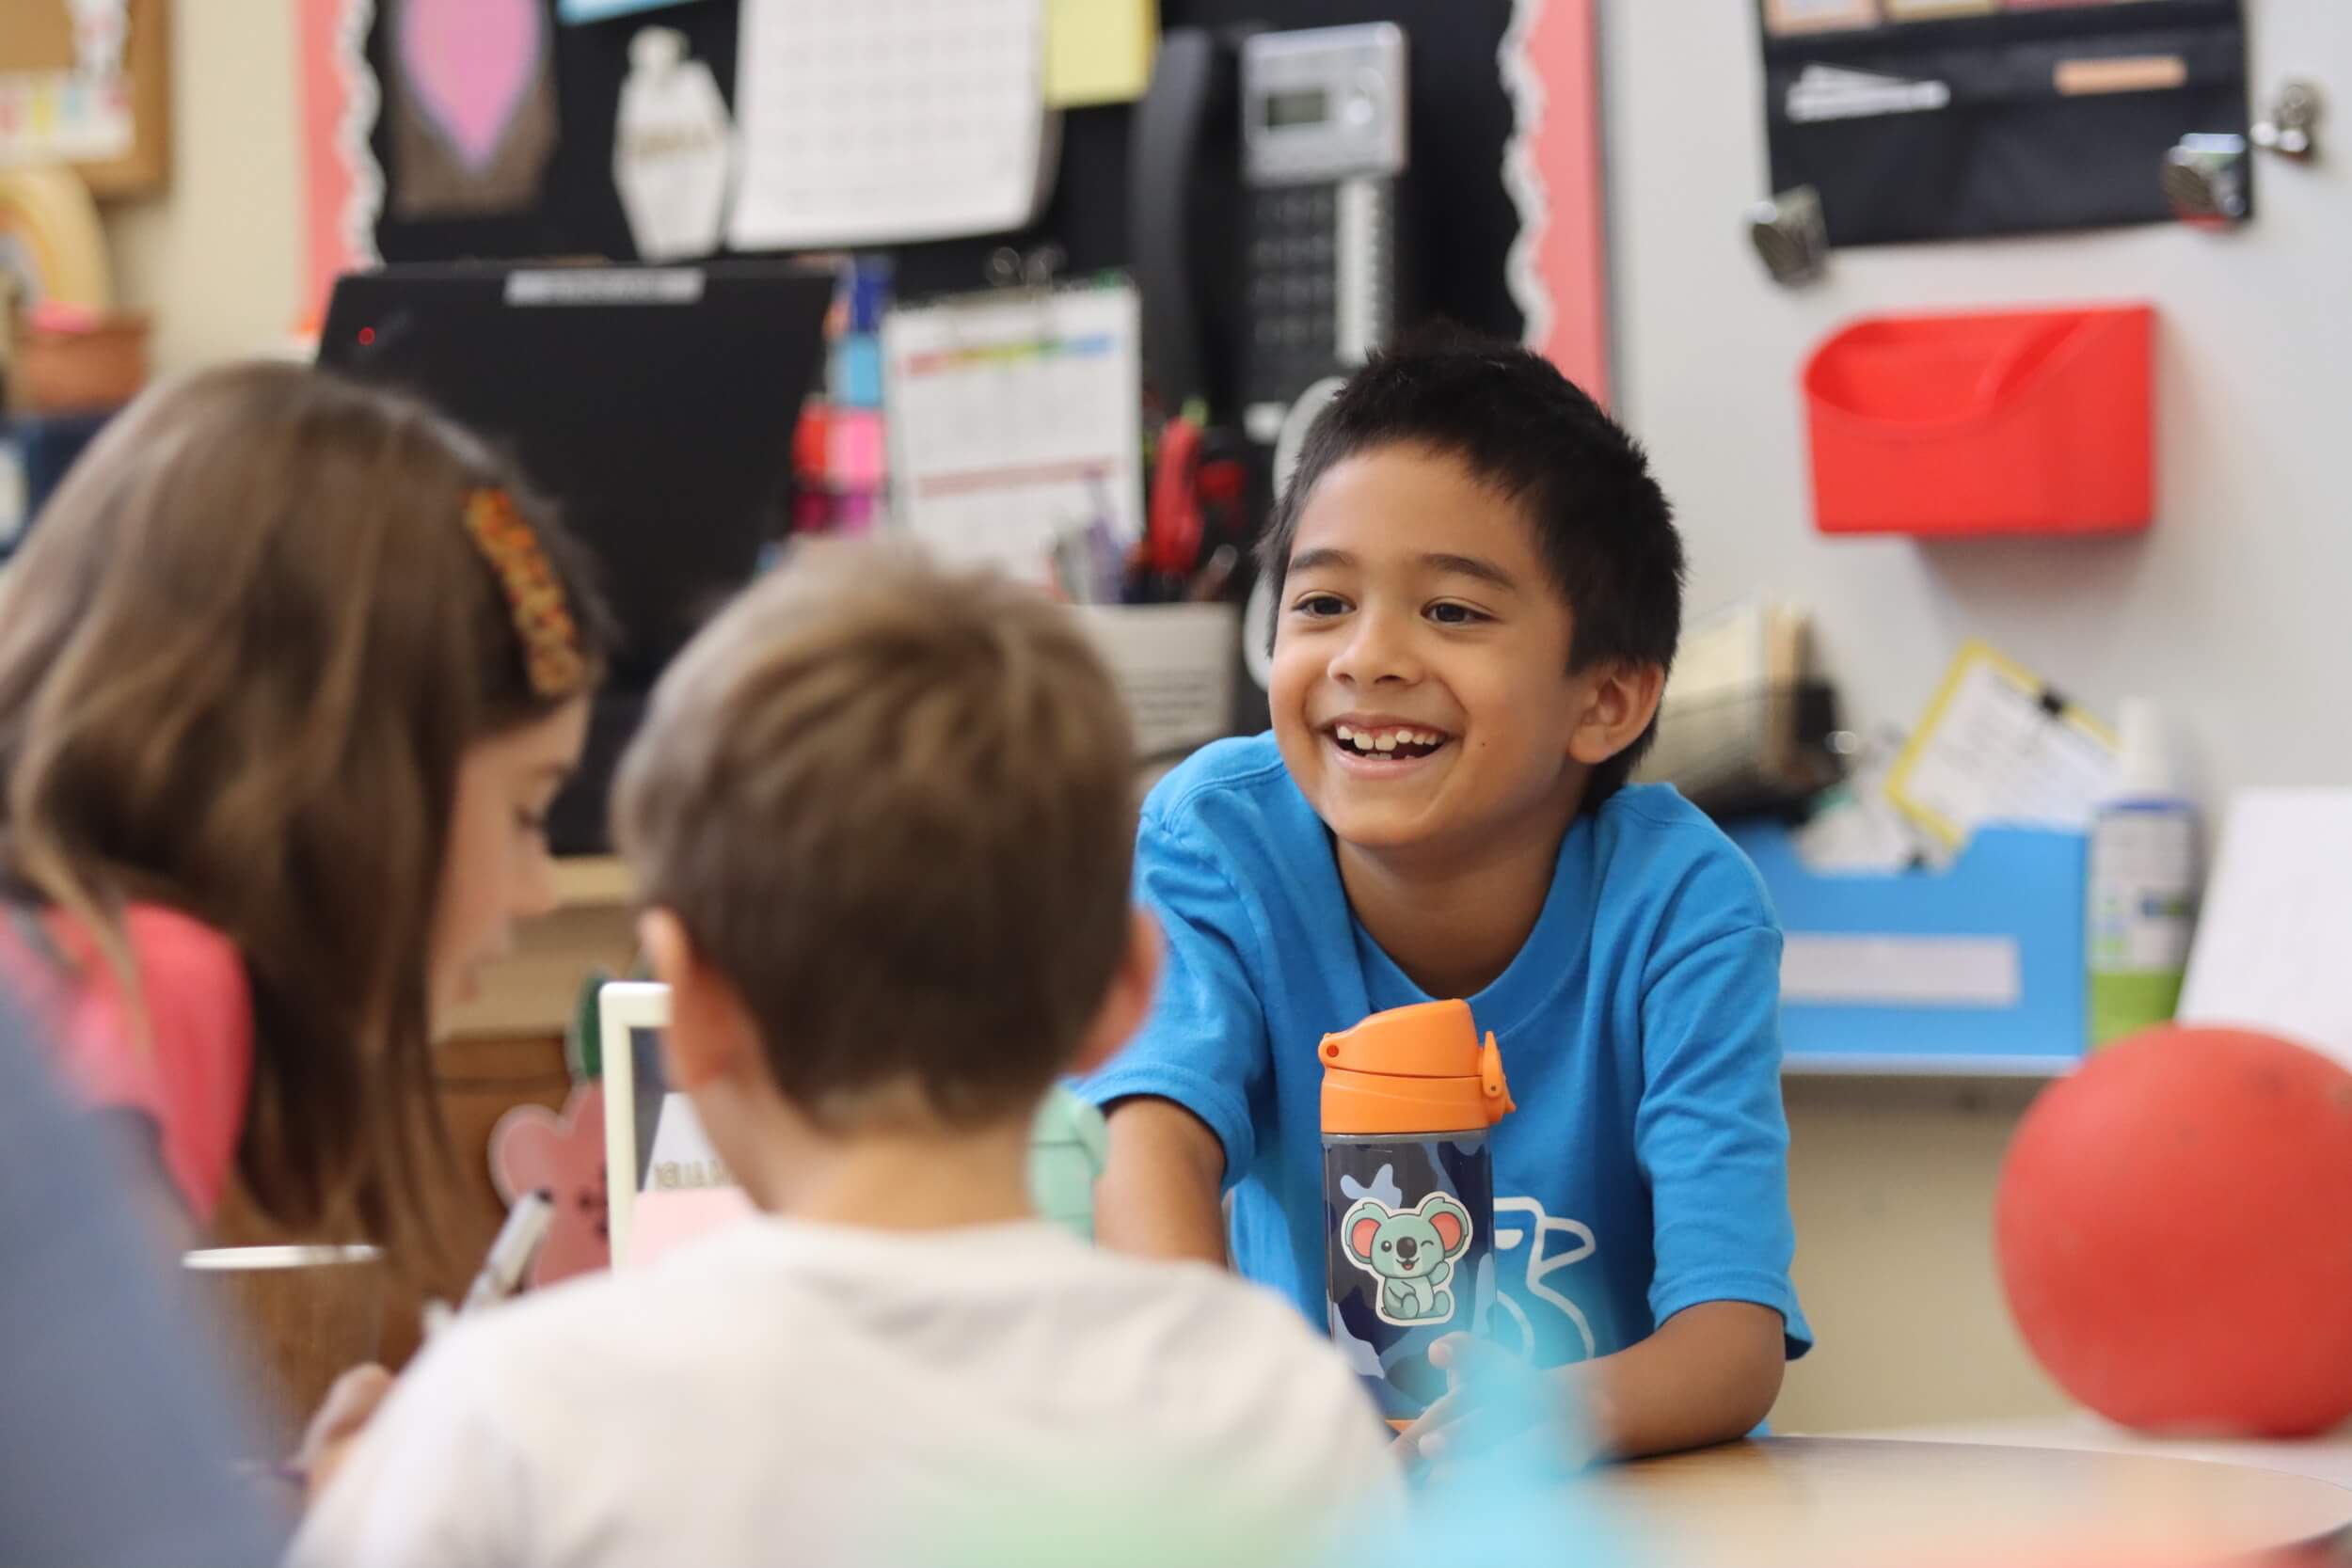 A 2nd grader smiling while working with a group